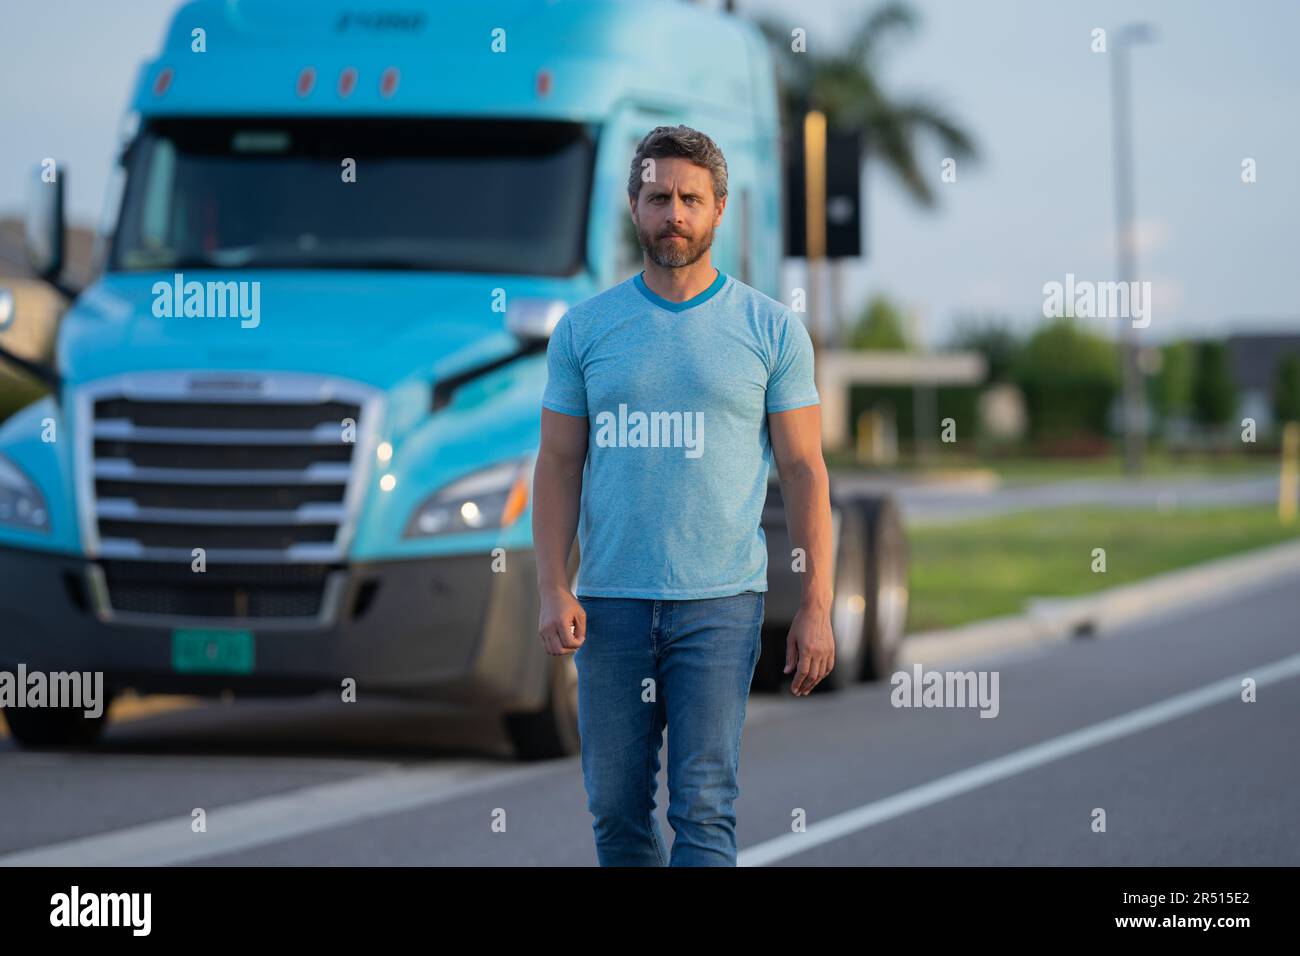 https://c8.alamy.com/comp/2R515E2/men-driver-near-lorry-truck-man-owner-truck-serious-middle-aged-man-trucker-trucking-owner-transportation-industry-vehicles-handsome-man-driver-2R515E2.jpg